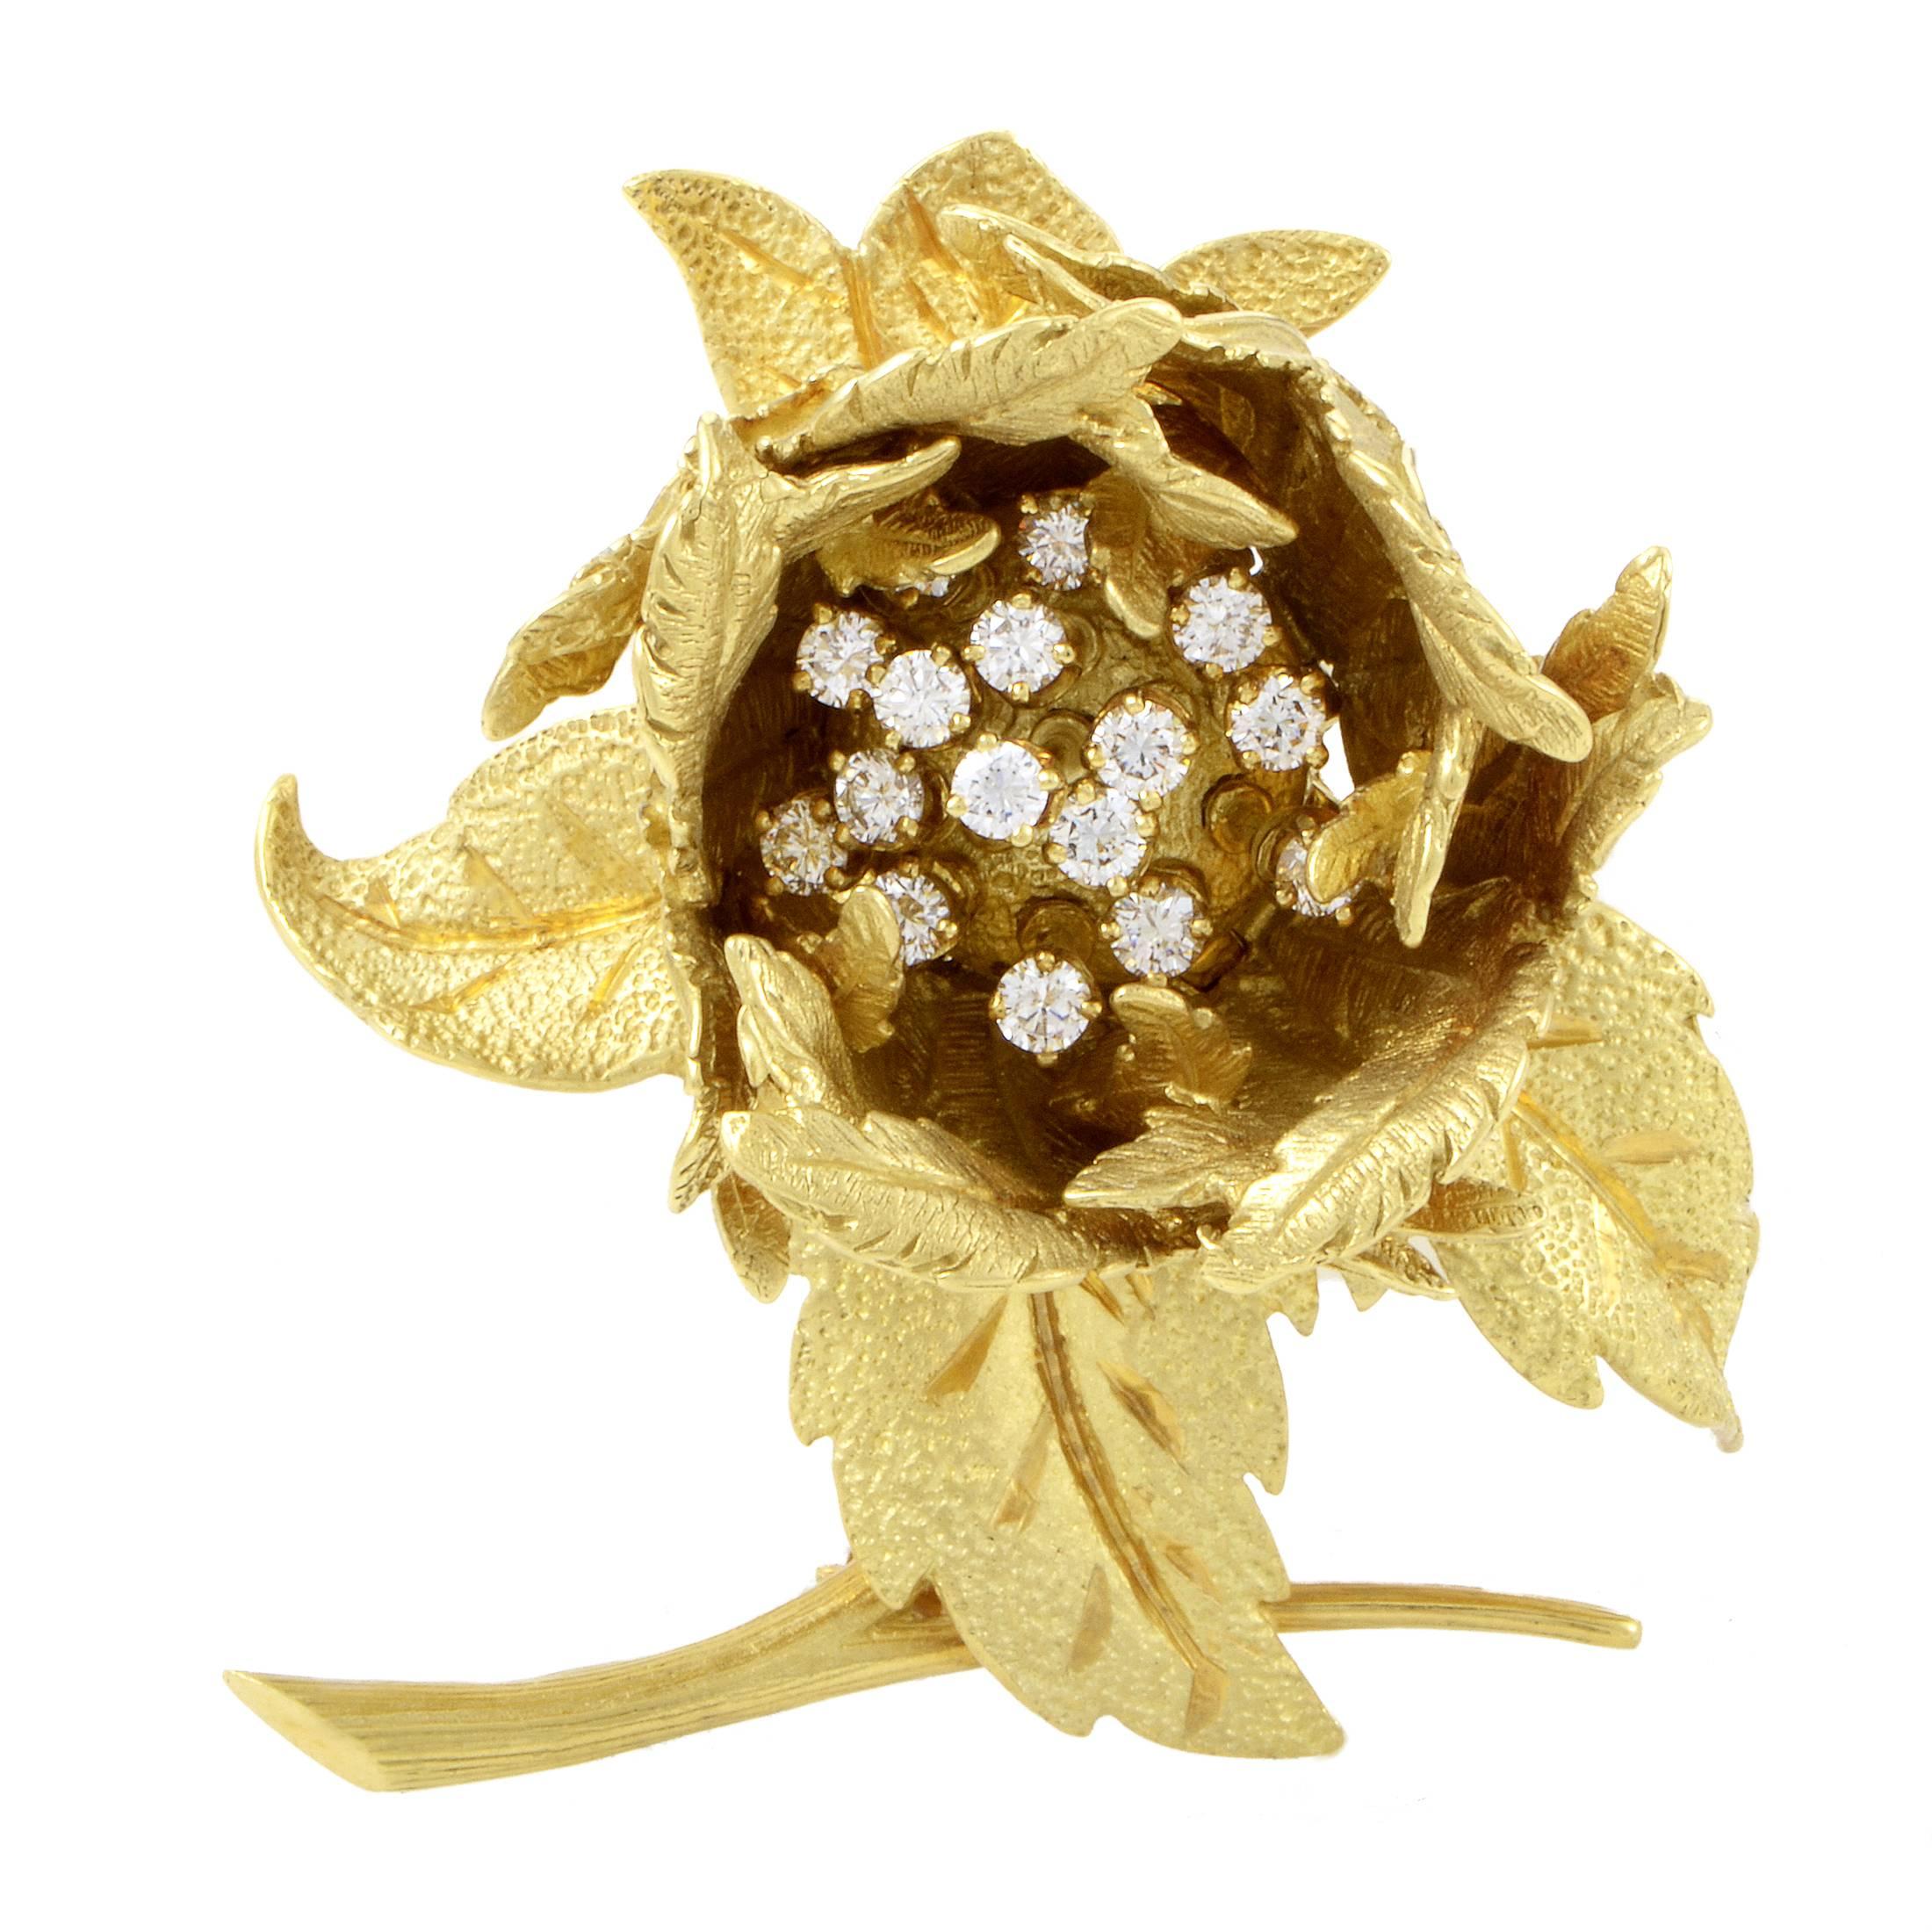 Applying an intriguingly rough finish to realistically depict a gorgeous motif, Hammerman Brothers present this extraordinary brooch made of brilliantly shaped 18K yellow gold and embellished with fascinating G-color diamonds of VS clarity weighing